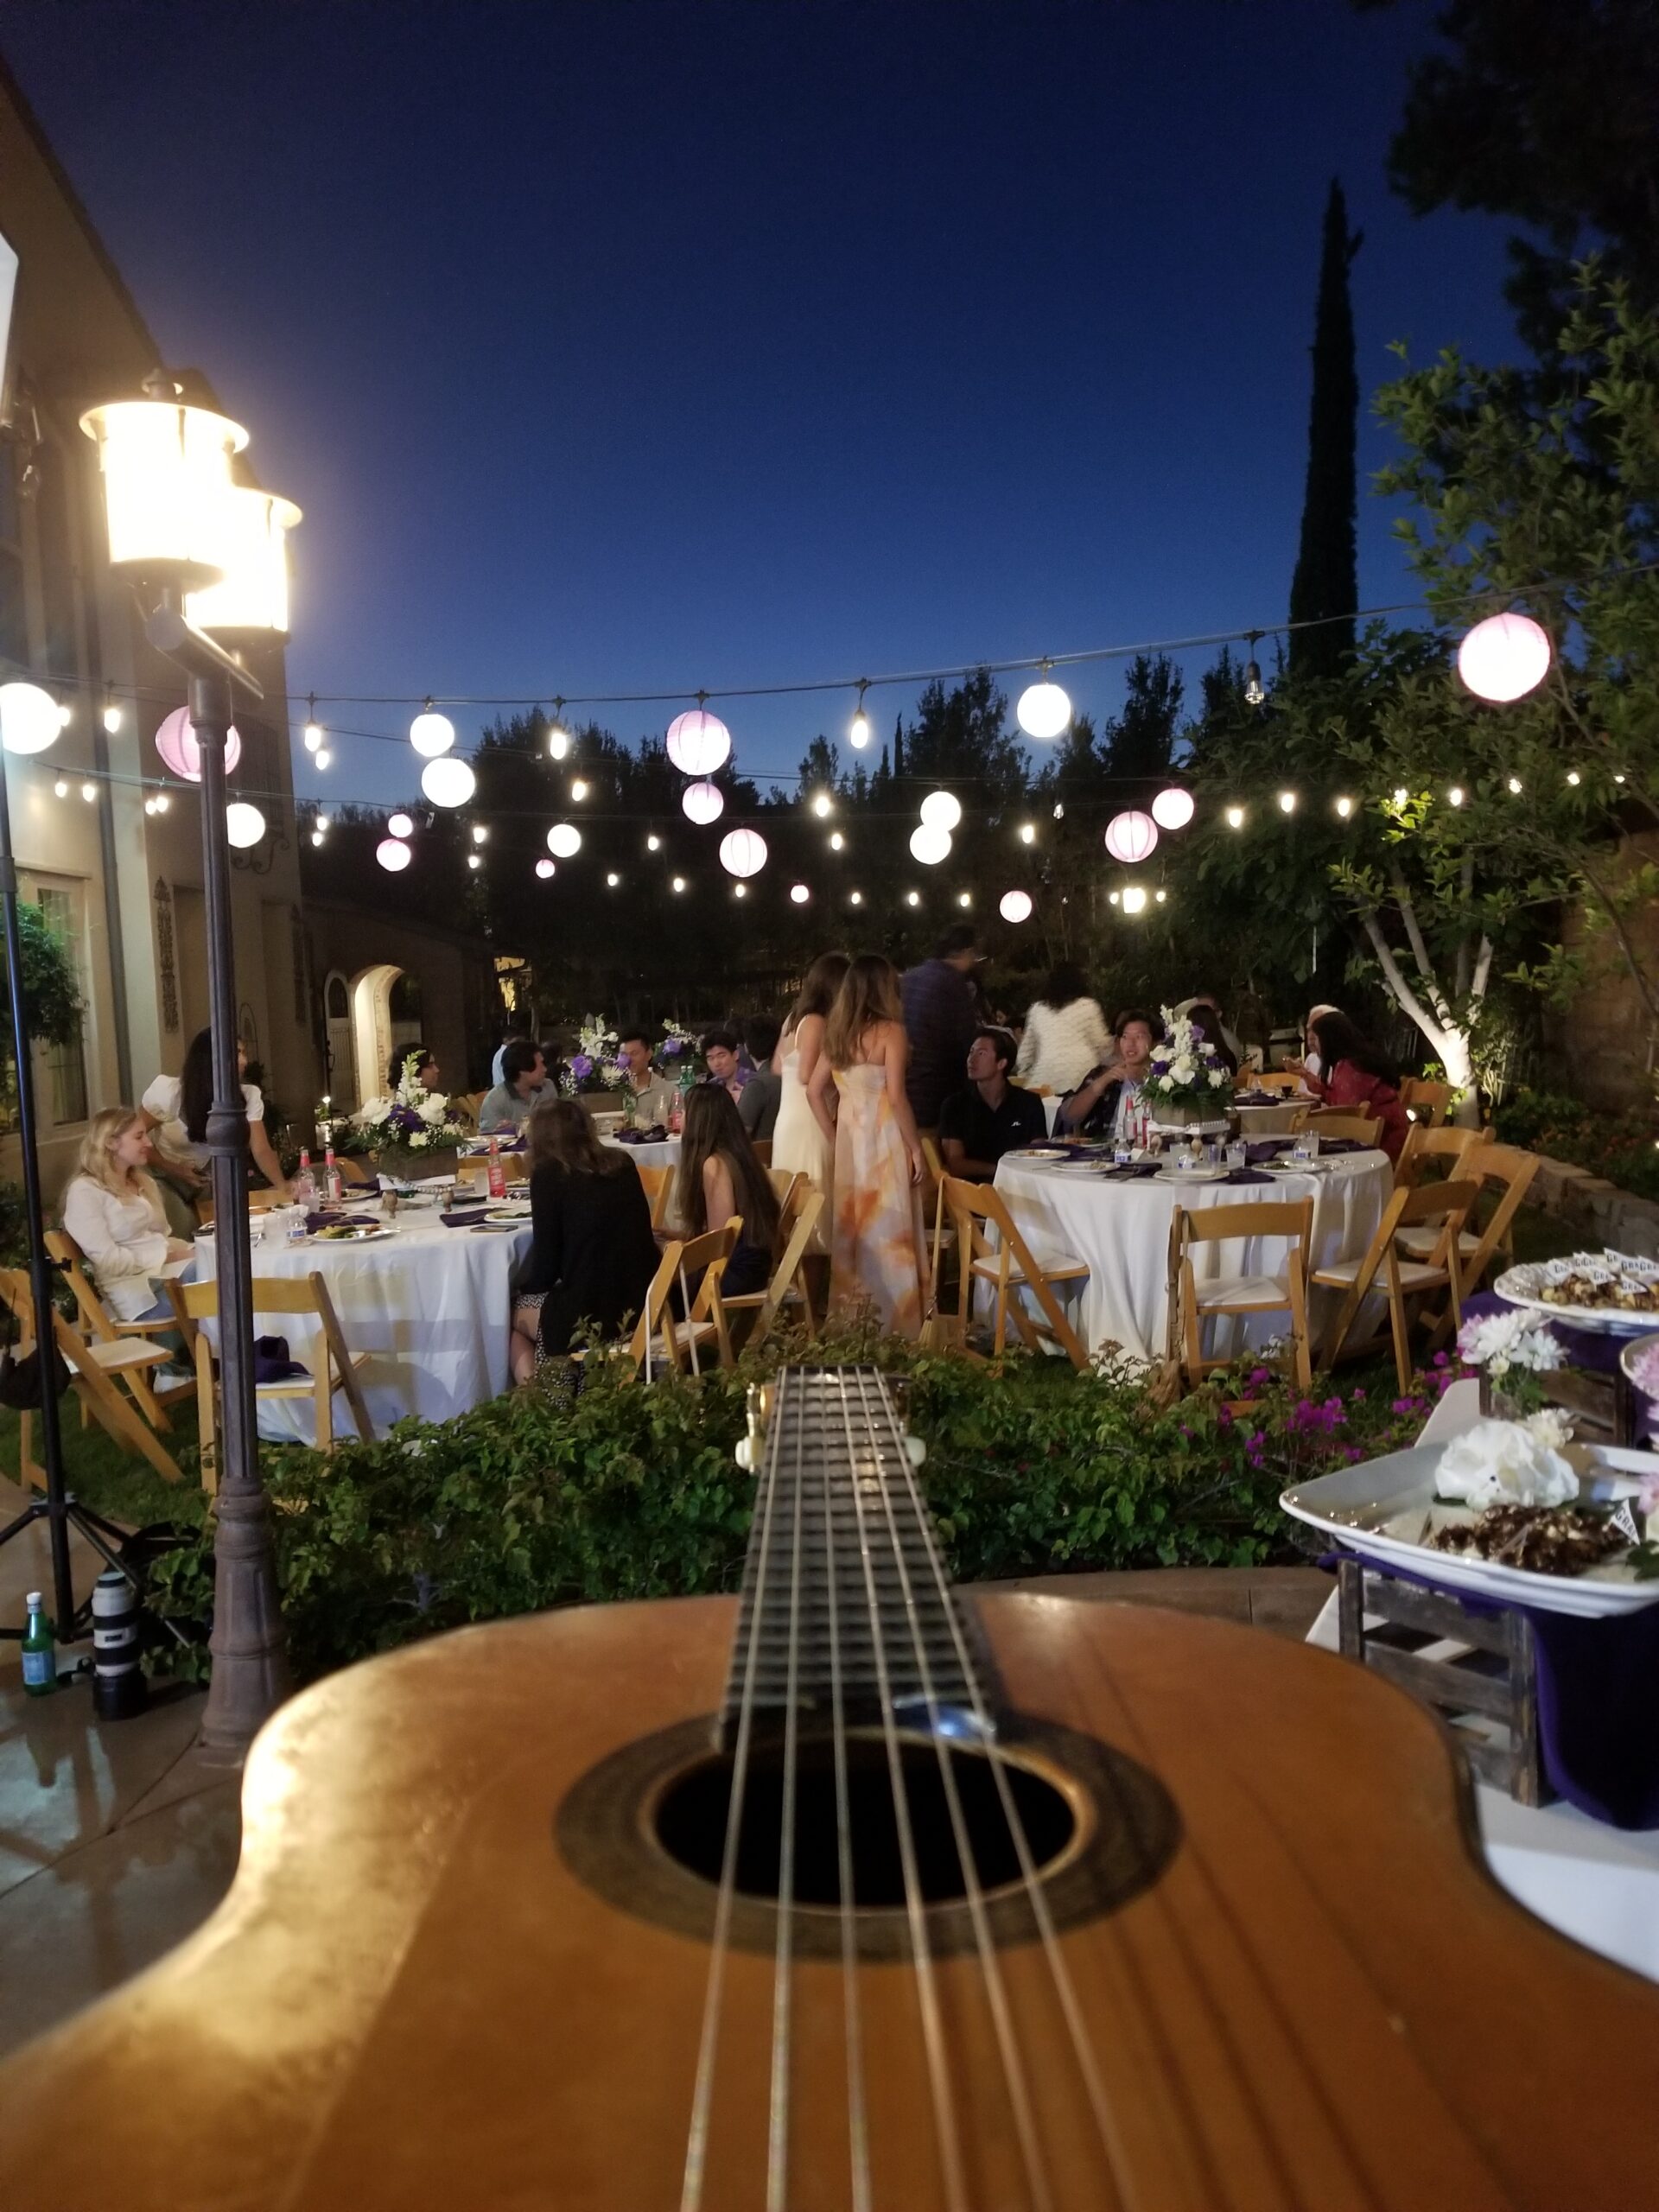 Los Angeles wedding ceremony music, Los Angeles wedding musicians, wedding reception music, Los angeles wedding ceremony music, Southern California wedding musicians, Jazz Trio, Los Angeles, Ventura, Santa Barbara, san diego, orange county. The classical guitar player should also play the spanish styles as well. Ian Kauffman live on a wedding in Palm Springs. Acoustic guitar player for weddings, acoustic guitar player for hire. I am the wedding musician and guitar player for san diego. I have played tons of weddings in los angeles and would love to play for you and your wedding ceremony either in los angeles or las vegas! Call me for your live wedding music and entertainment needs in santa barbara or ventura. I have the best live music as a professional guitarist anywhere in California.I play ceremony wedding music and am a for hire spanish wedding guitarist in Temecula and San diego spanish and orange county. I am the best acoustic solo guitarist in san diego playing popular wedding songs on acoustic guitar latin musician for hire, professional services of live music now playing live acoustic guitarist for weddings, Ian Kauffman live on a wedding in Palm Springs. Acoustic guitar player for weddings, acoustic guitar player for hire, wedding musicians san diego, los angeles wedding music, ceremony wedding music, hire a guitarist, spanish guitarist san diego, wedding songs spanish, wedding songs acoustic, spanish classical guitarist, spanish songs for weddings, san diego guitarist, spanish guitar player, weddings songs with guitar, los angeles guitarist, wedding entertainment near me, live music wedding ceremony, wedding musicians, musicians for a wedding, ceremony musician, wedding ceremony guitarist, musicians for a wedding ceremony, acoustic guitarist near me, spanish guitar musician, spanish guitarist los angeles, spanish guitar orange county, spanish guitar southern california, latin guitarist, bossa nova guitarist, modern acoustic wedding songs, classical guitar wedding music, wedding guitarist near me. classical guitar wedding ceremony orange county wedding guitarist